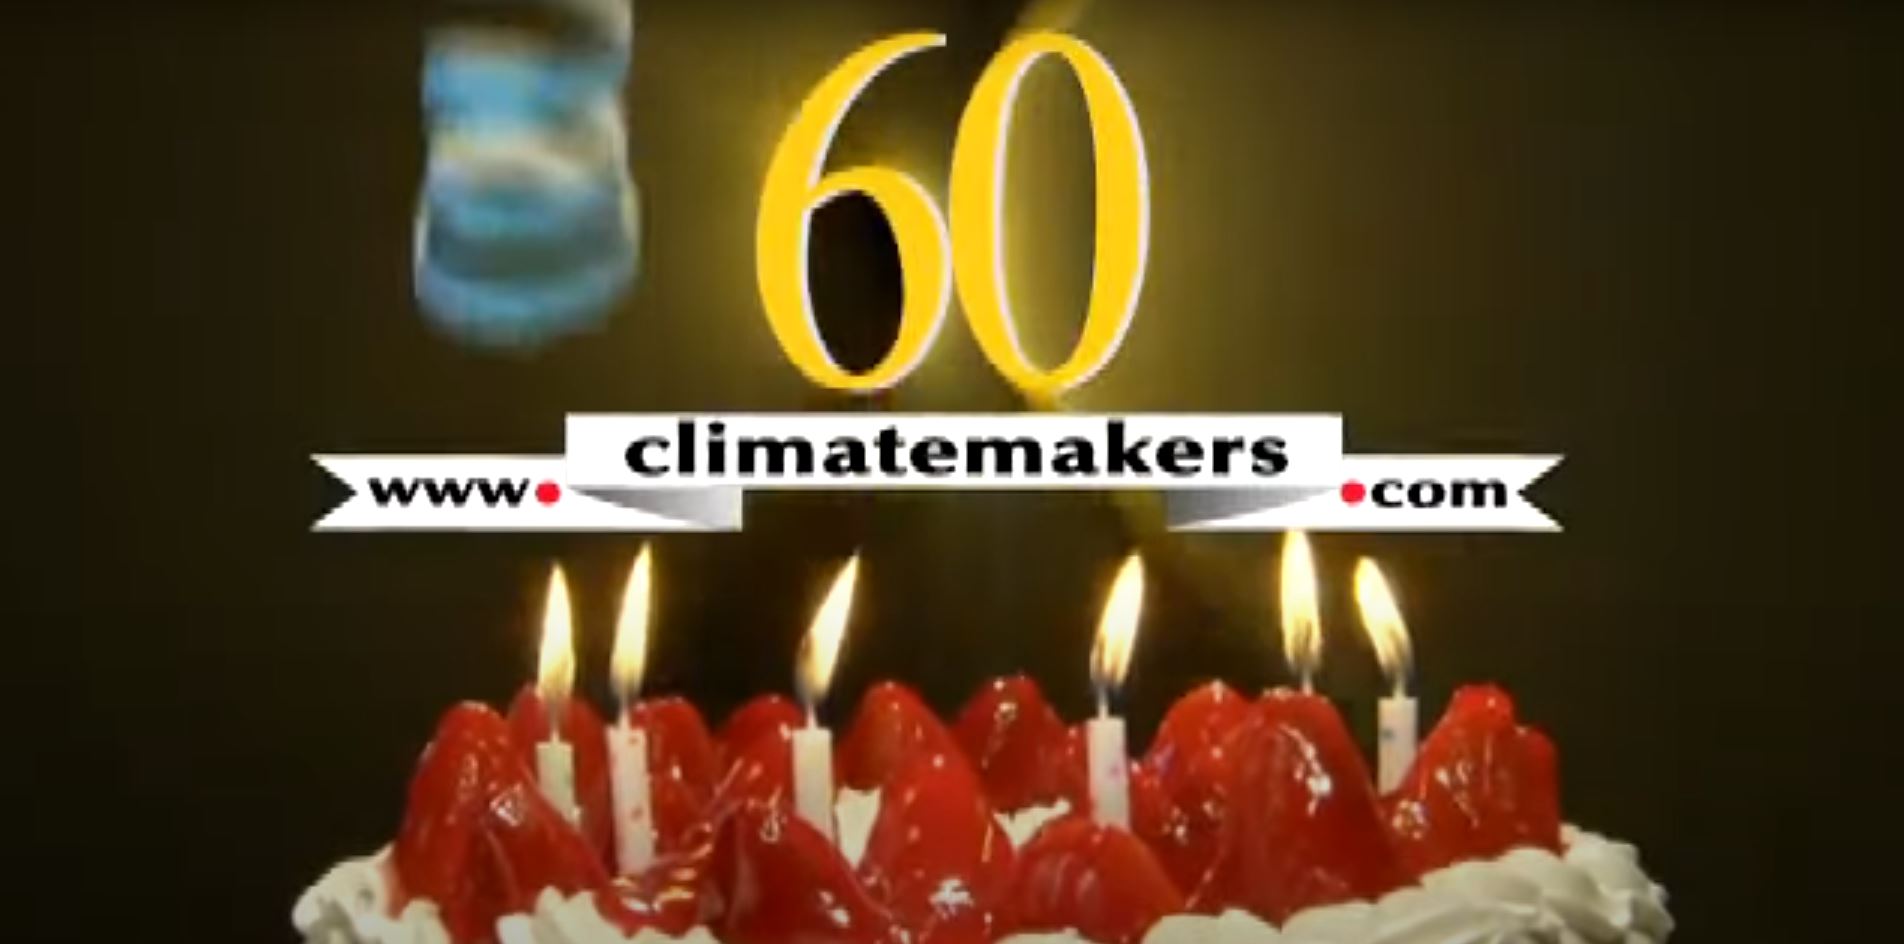 Climatemakers: Over a Half Century of Customer Satisfaction | HVAC Services in Virginia Beach